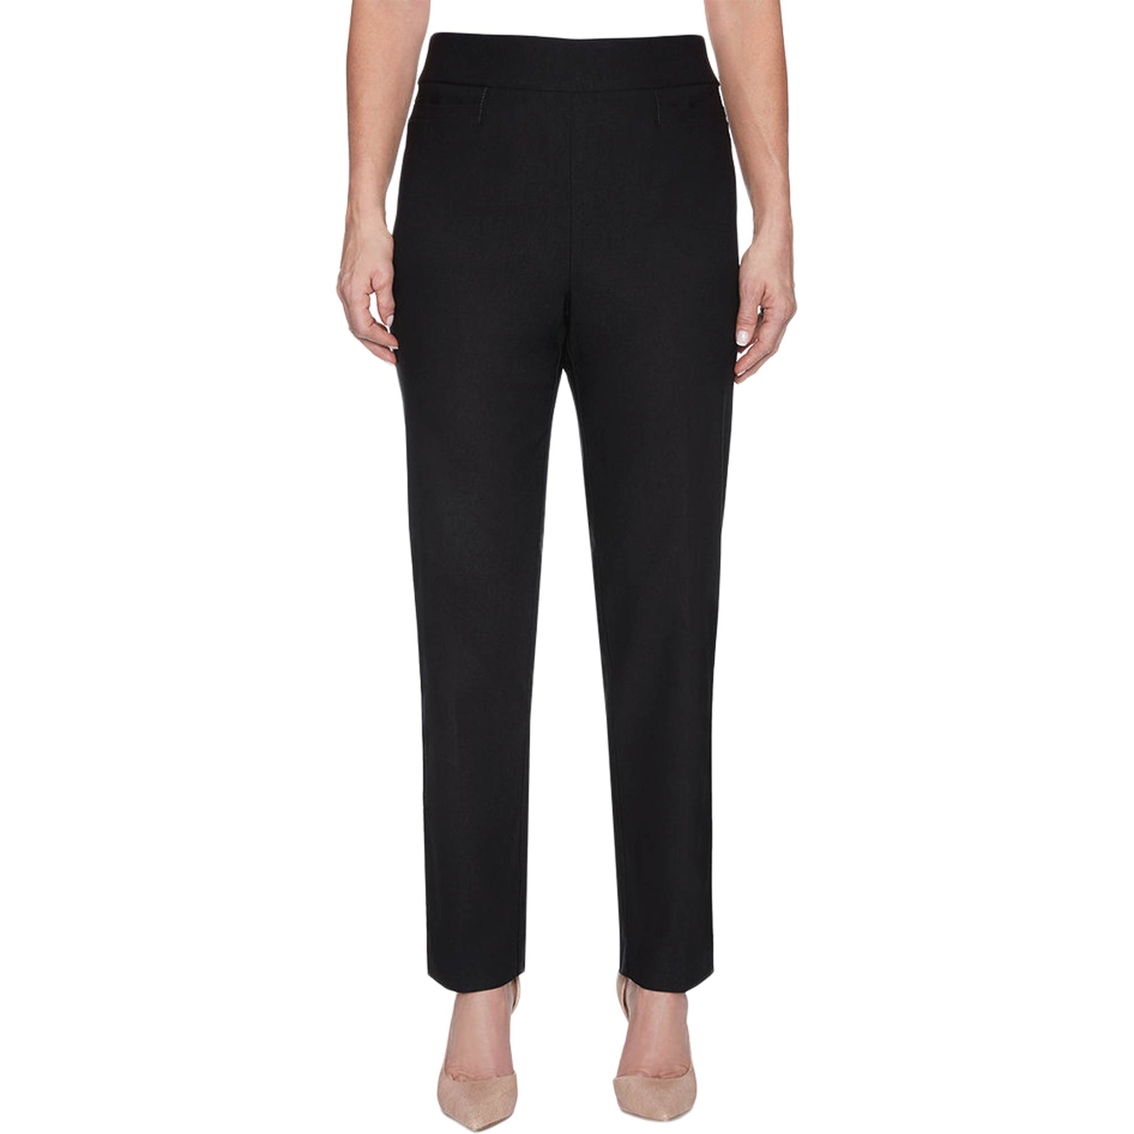 Alfred Dunner Proportioned Short Knit Pants | Pants | Clothing ...